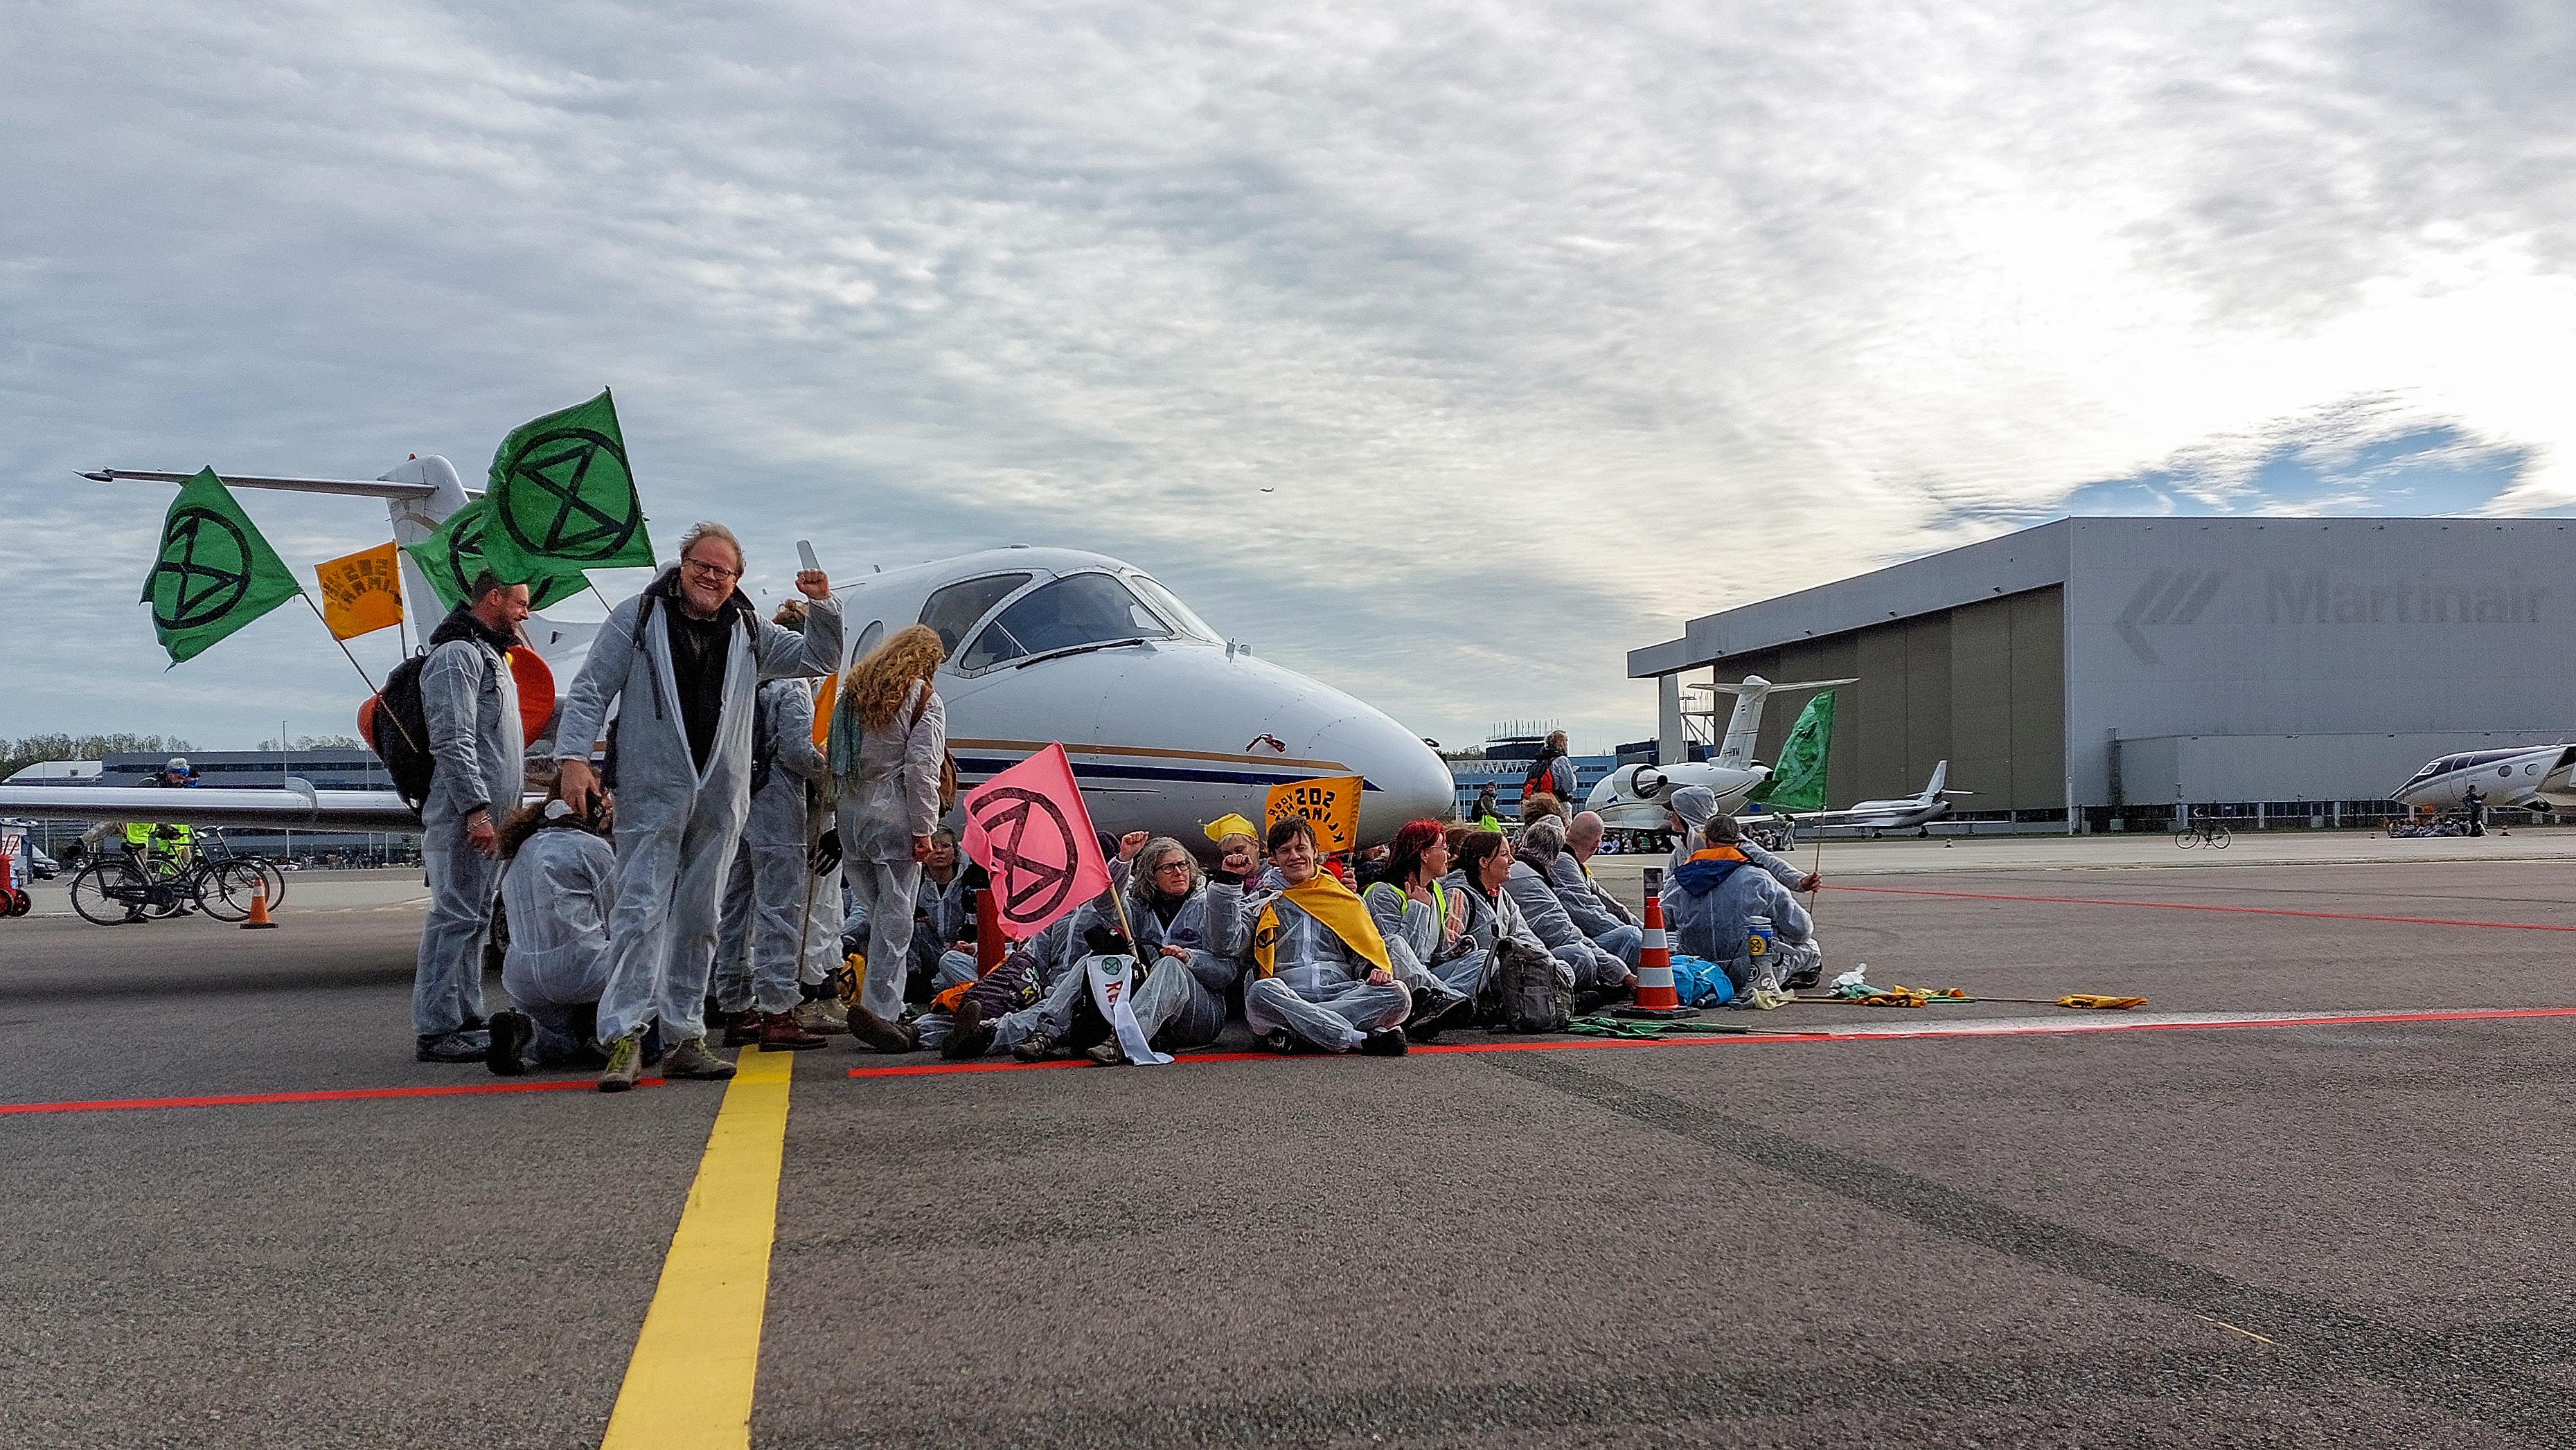 Activists block a private jet at Schiphol airport